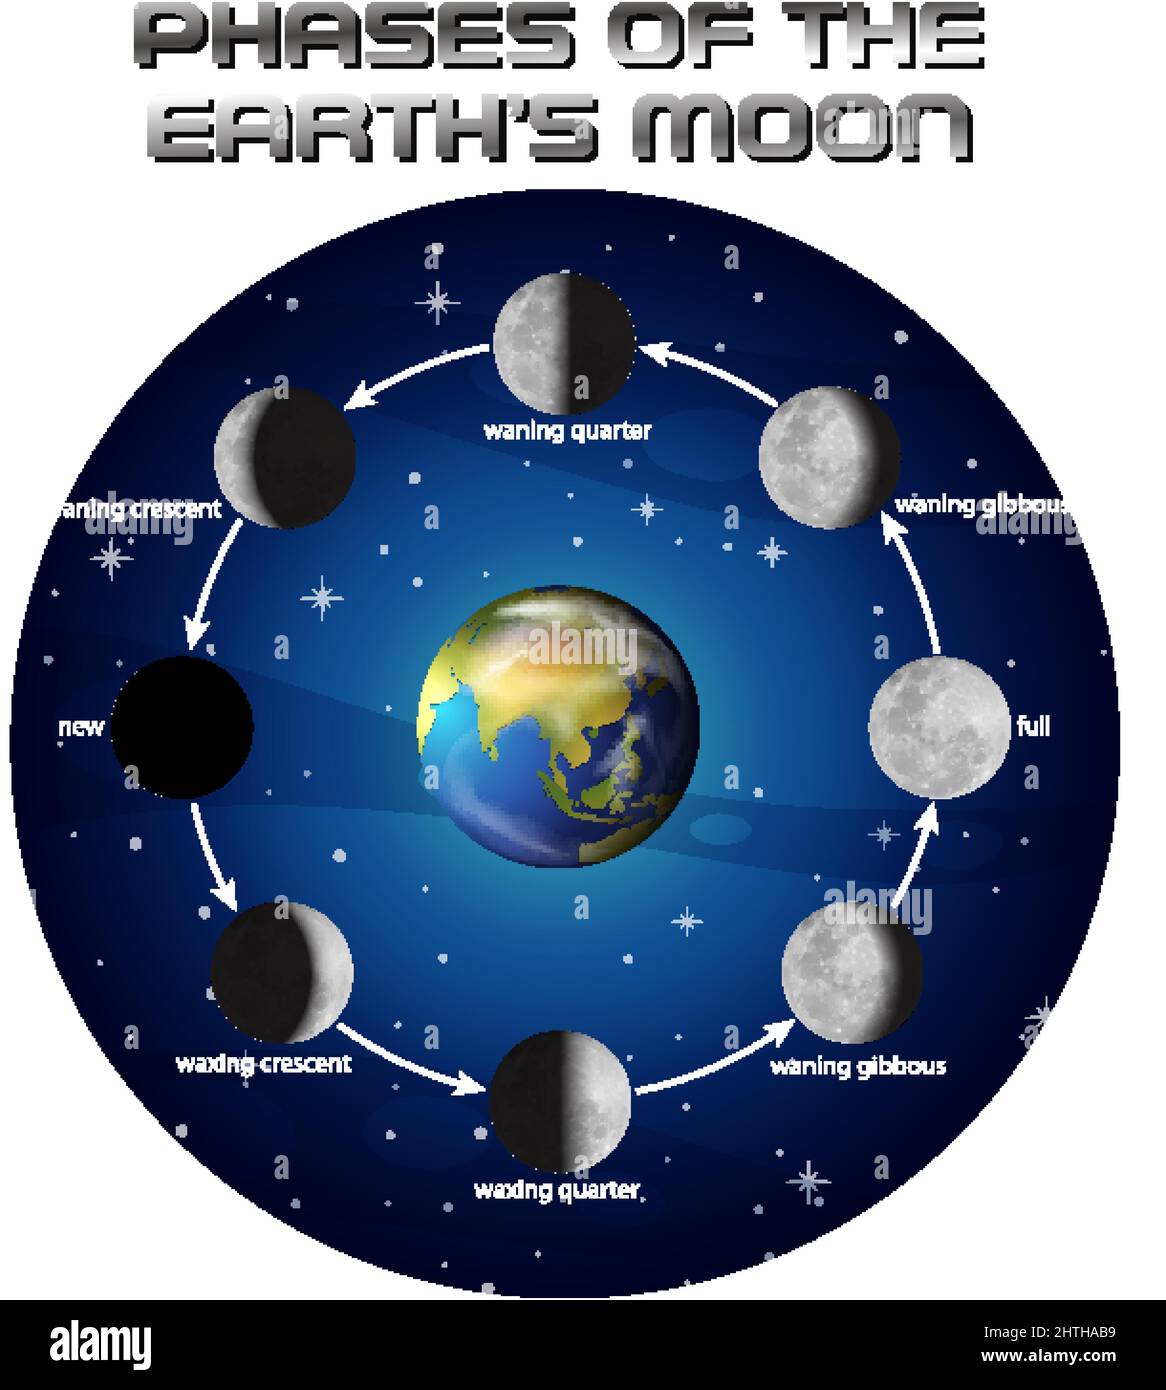 Phases of the moon for science education illustration Stock Vector